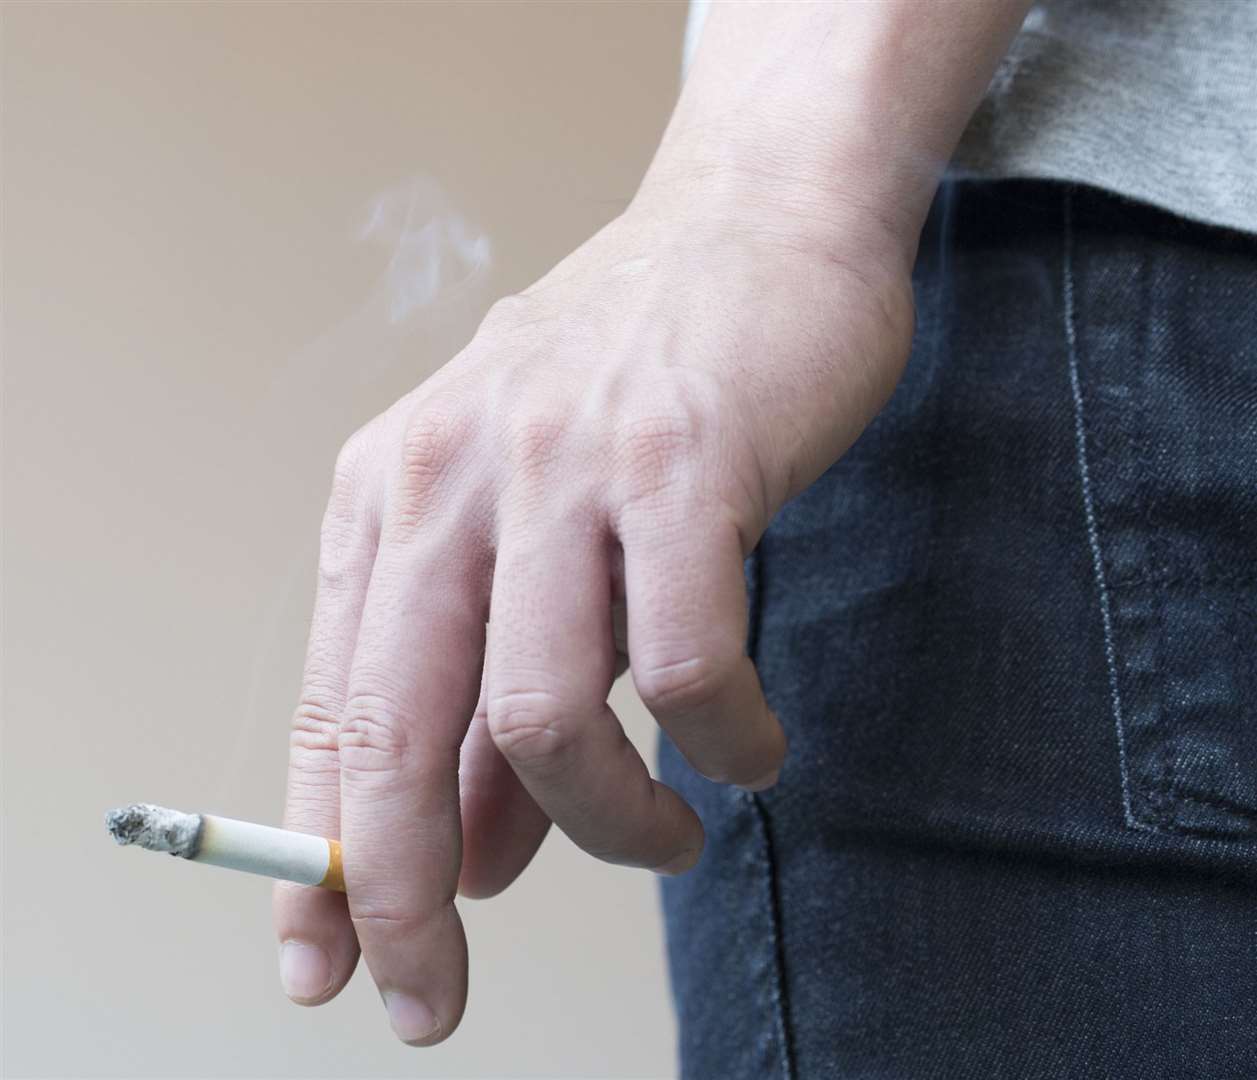 Smokers are urged to ensure cigarettes are fully extinguished. Picture: iStock/PA